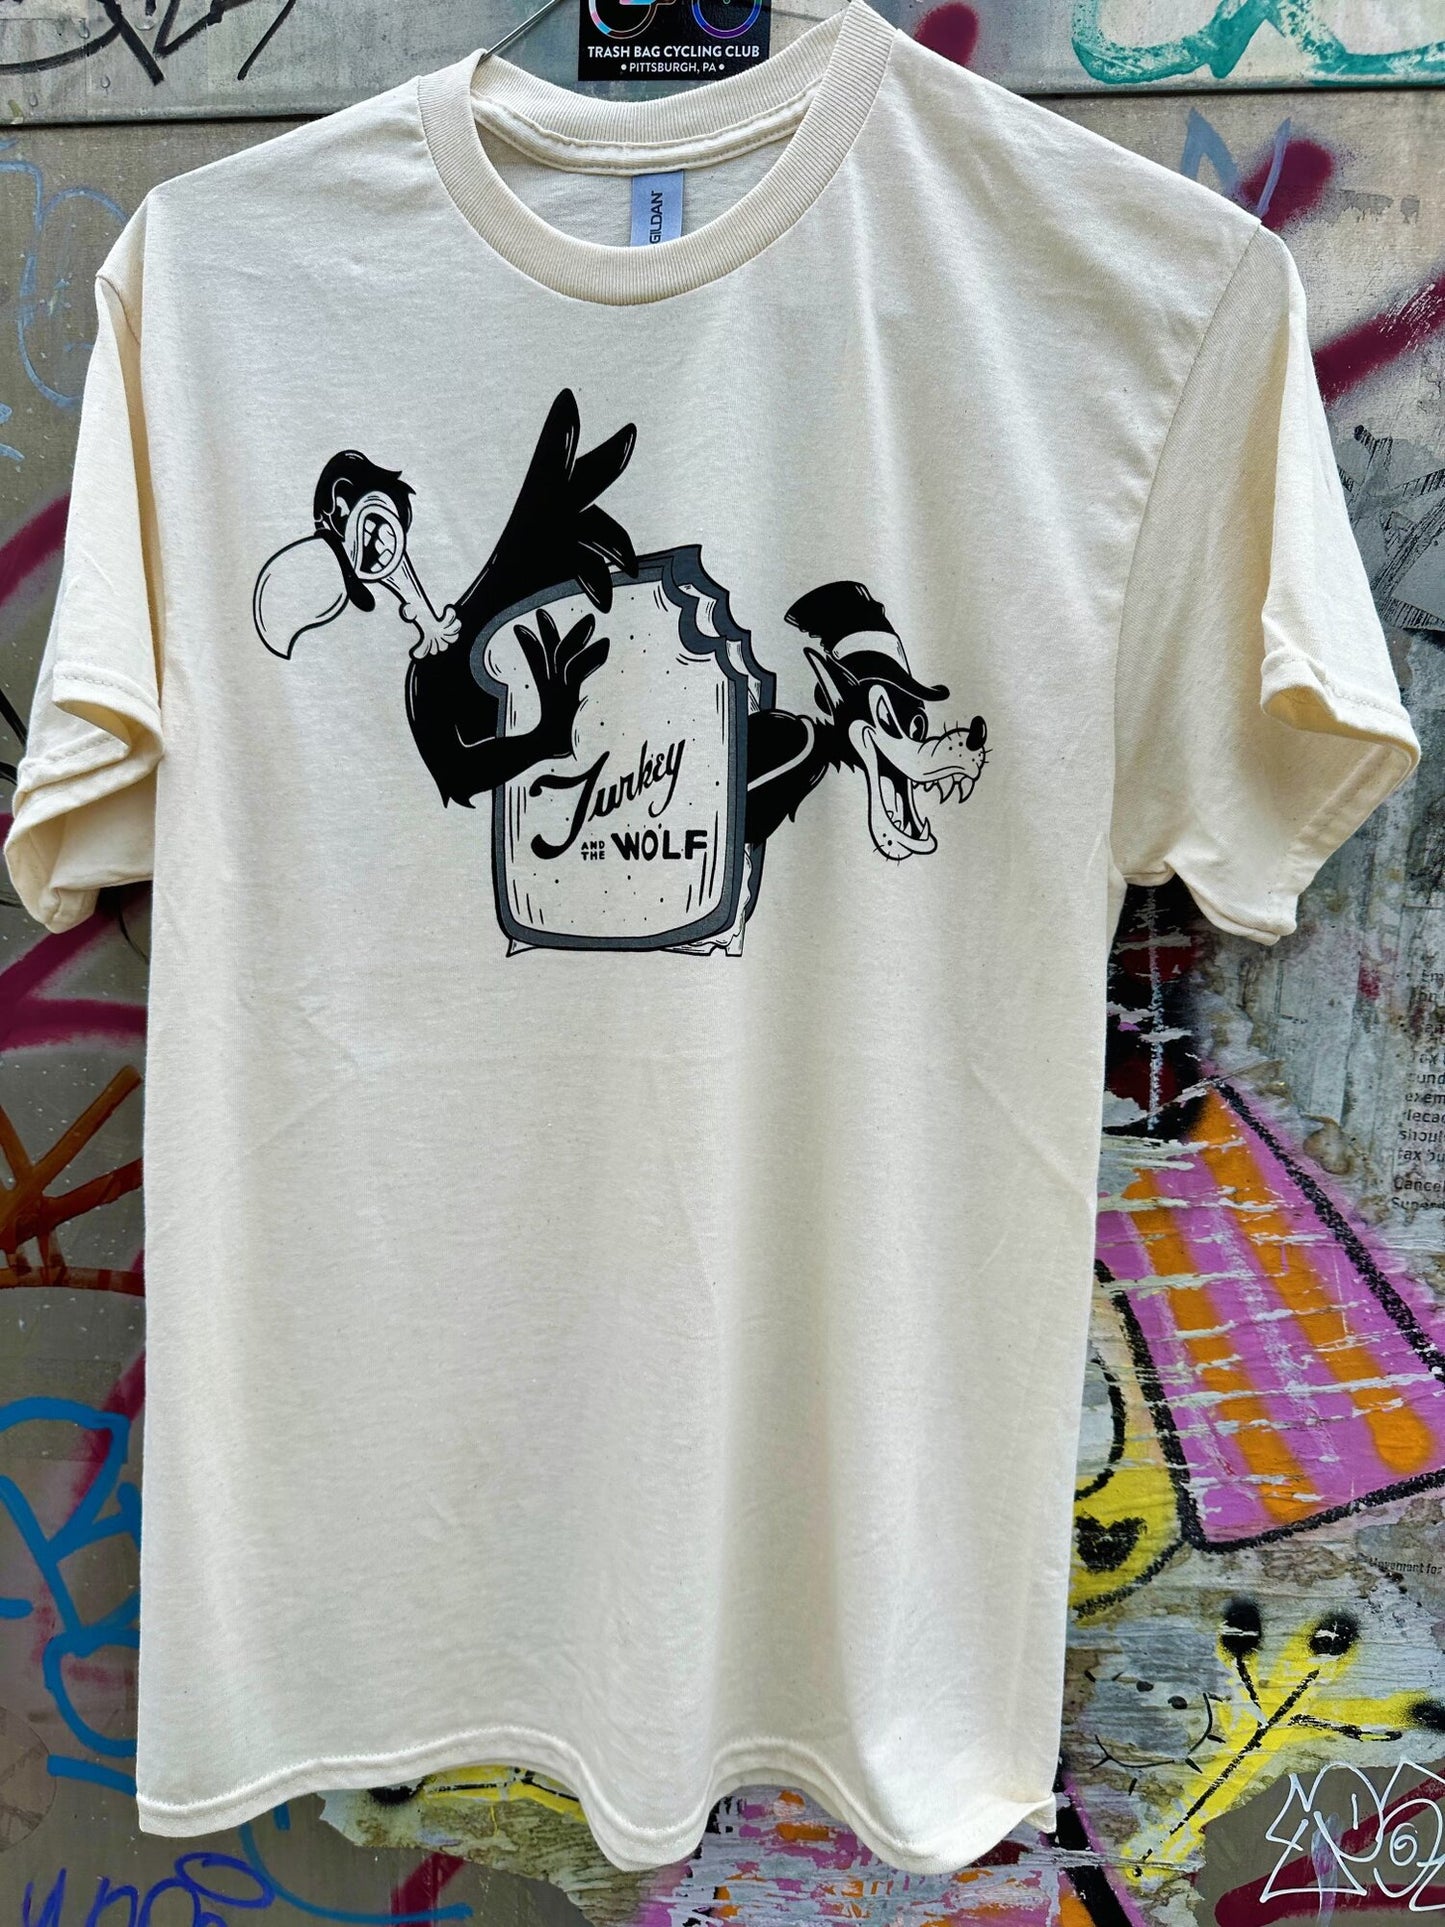 A t-shirt featuring a cartoon character, adding a touch of fun and playfulness to your wardrobe.